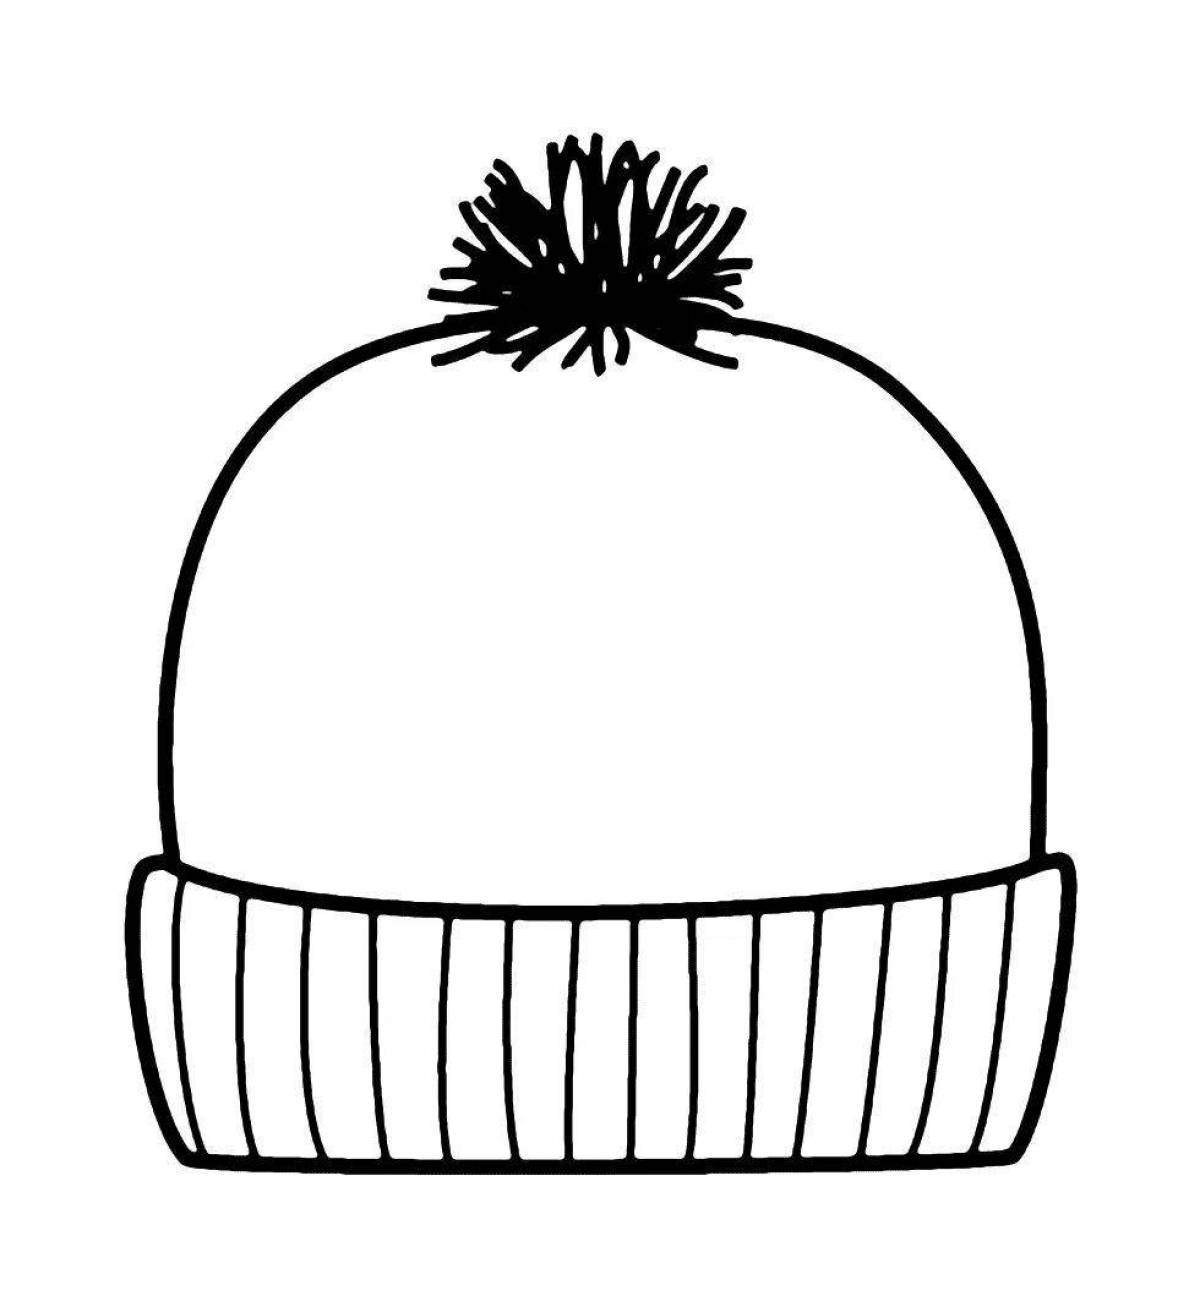 Attractive winter hat coloring book for kids